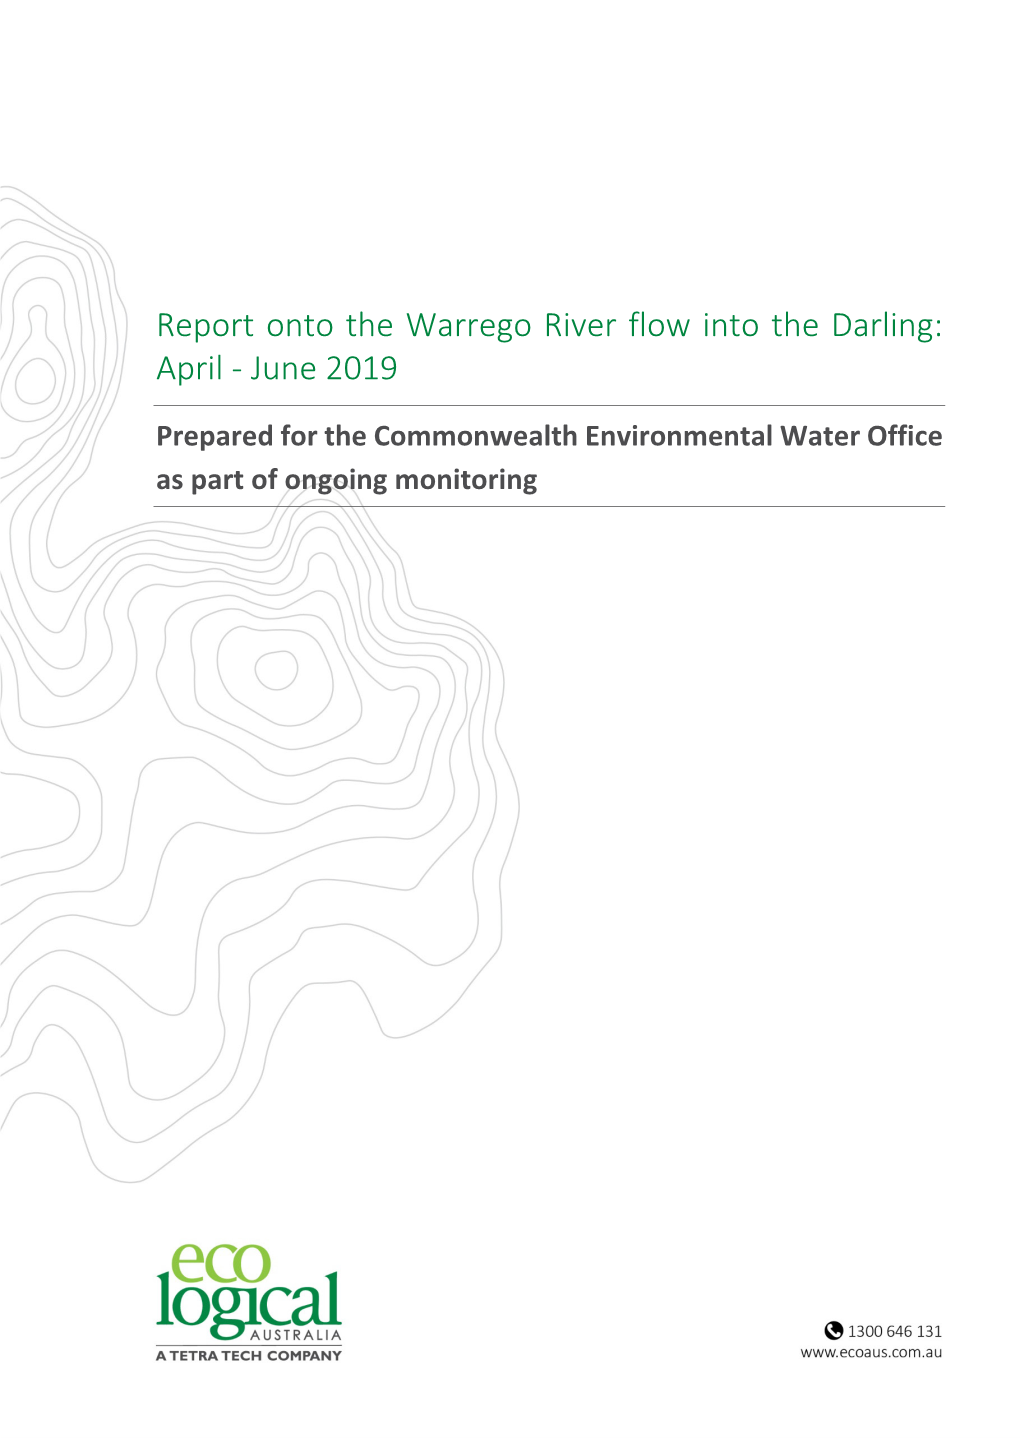 Report Onto the Warrego River Flow Into the Darling: April - June 2019